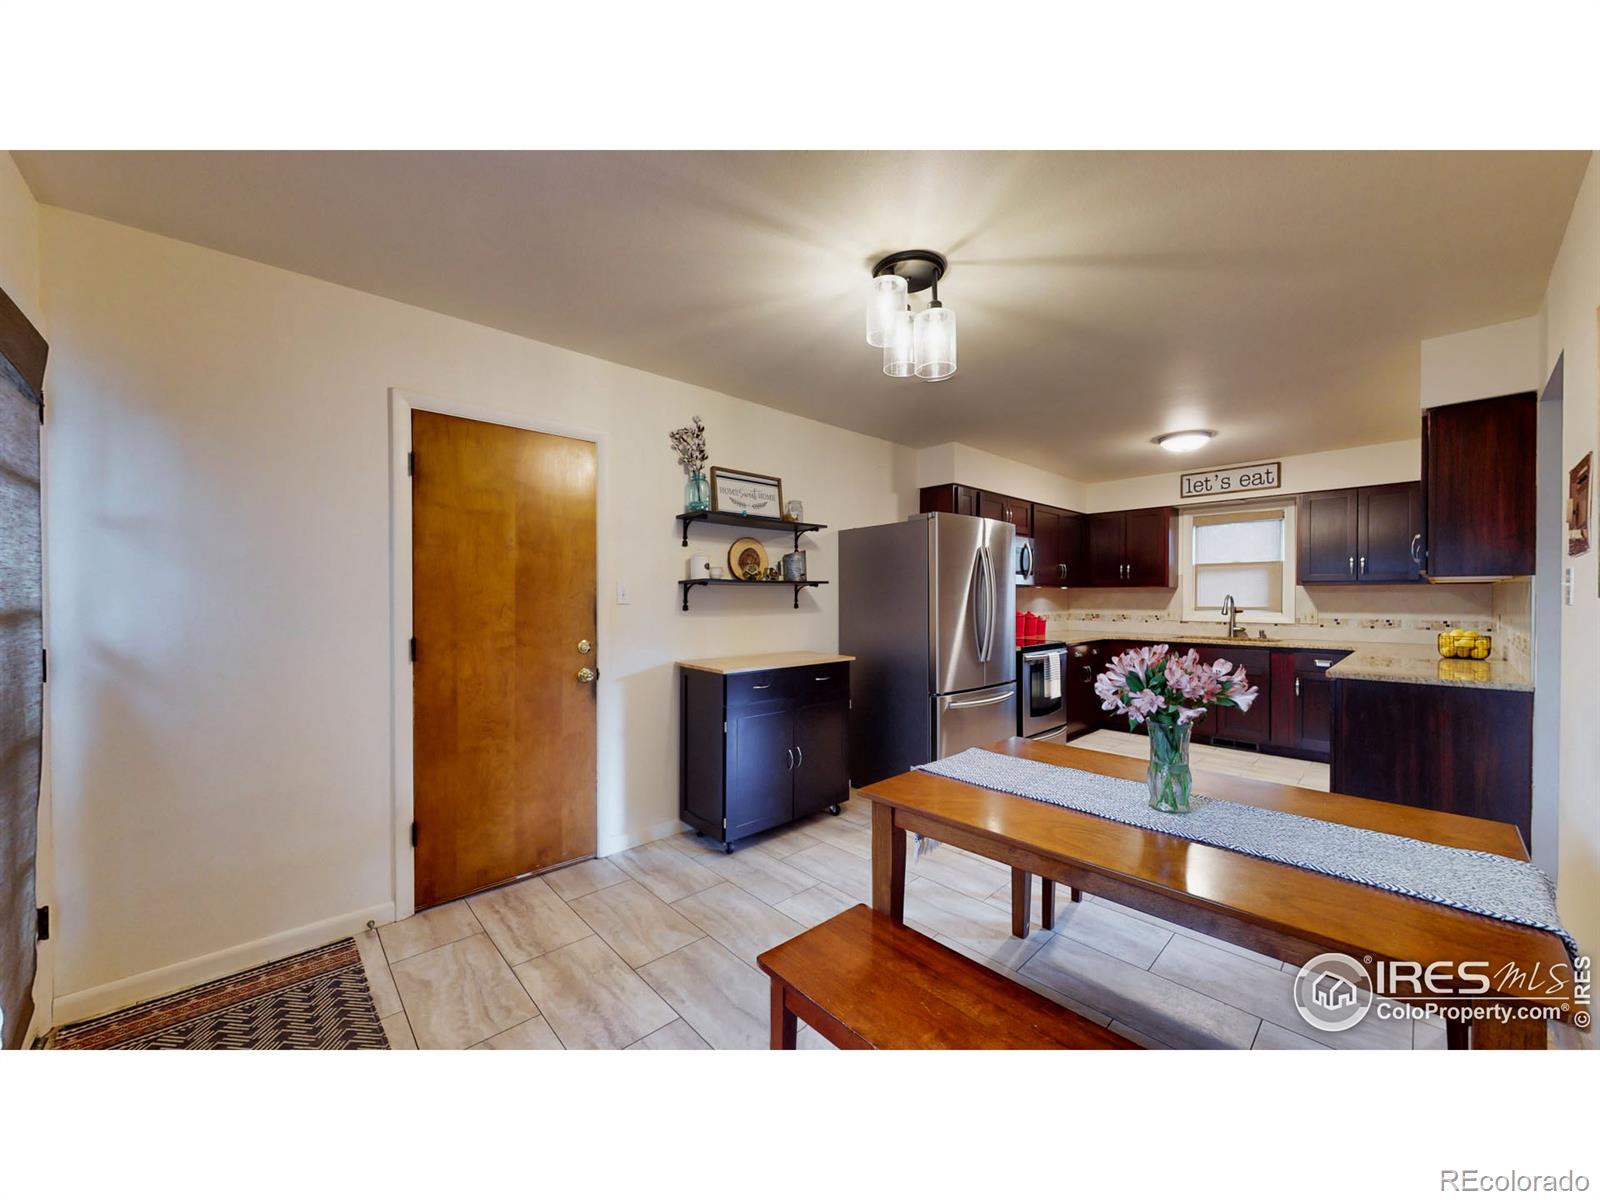 1060 Briarwood, Fort Collins, CO